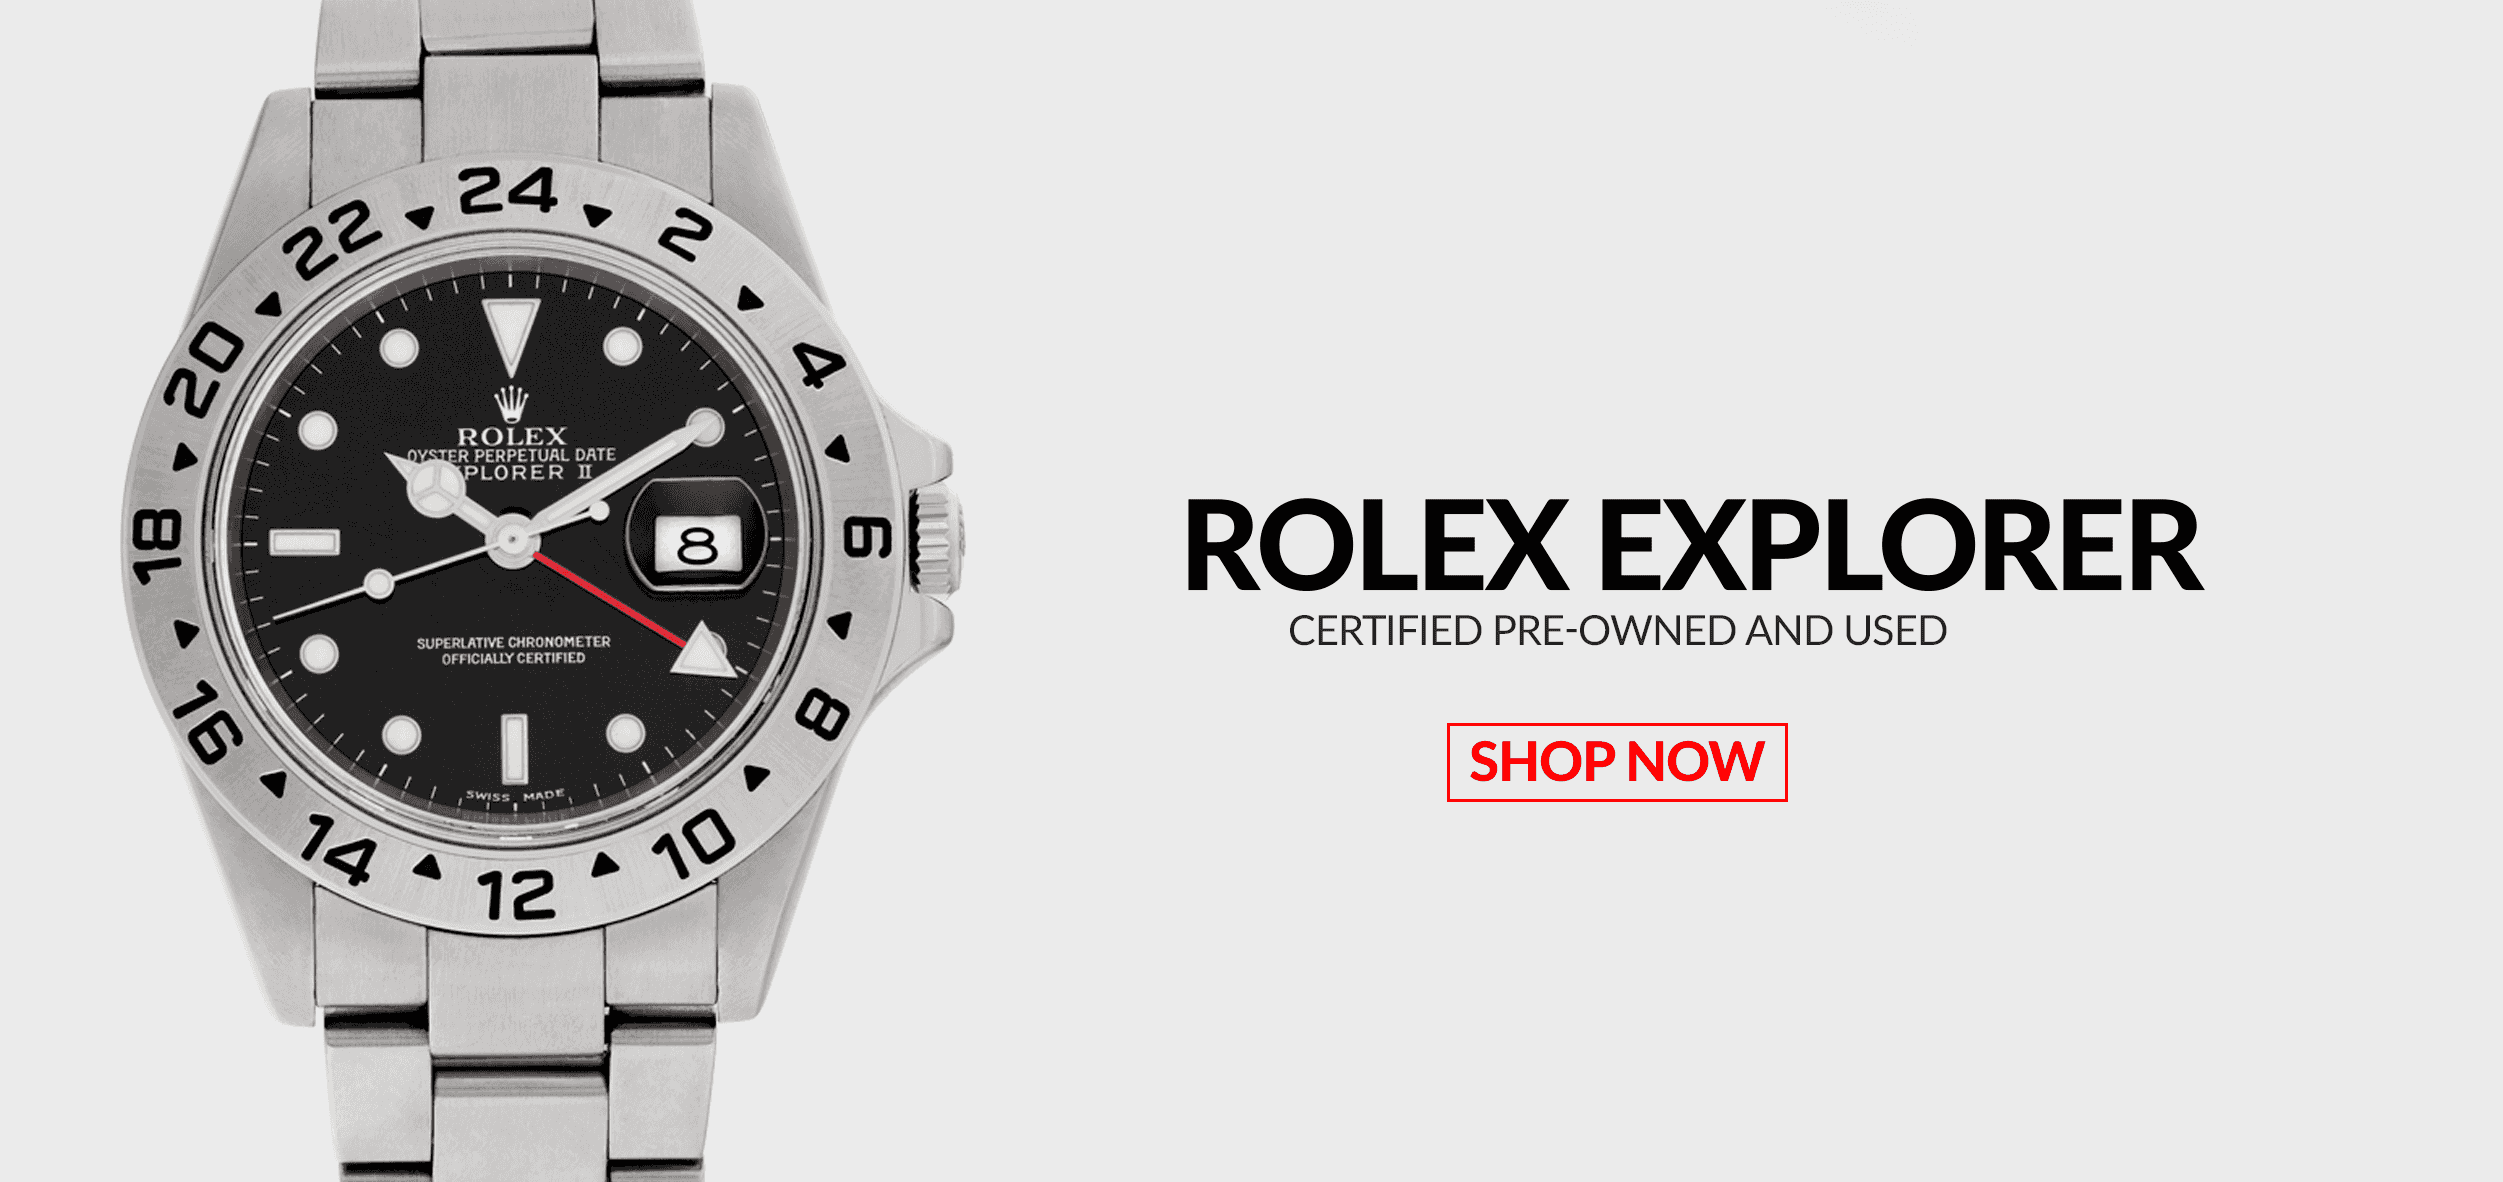 Pre-Owned Certified Used Rolex Explorer Watches Header